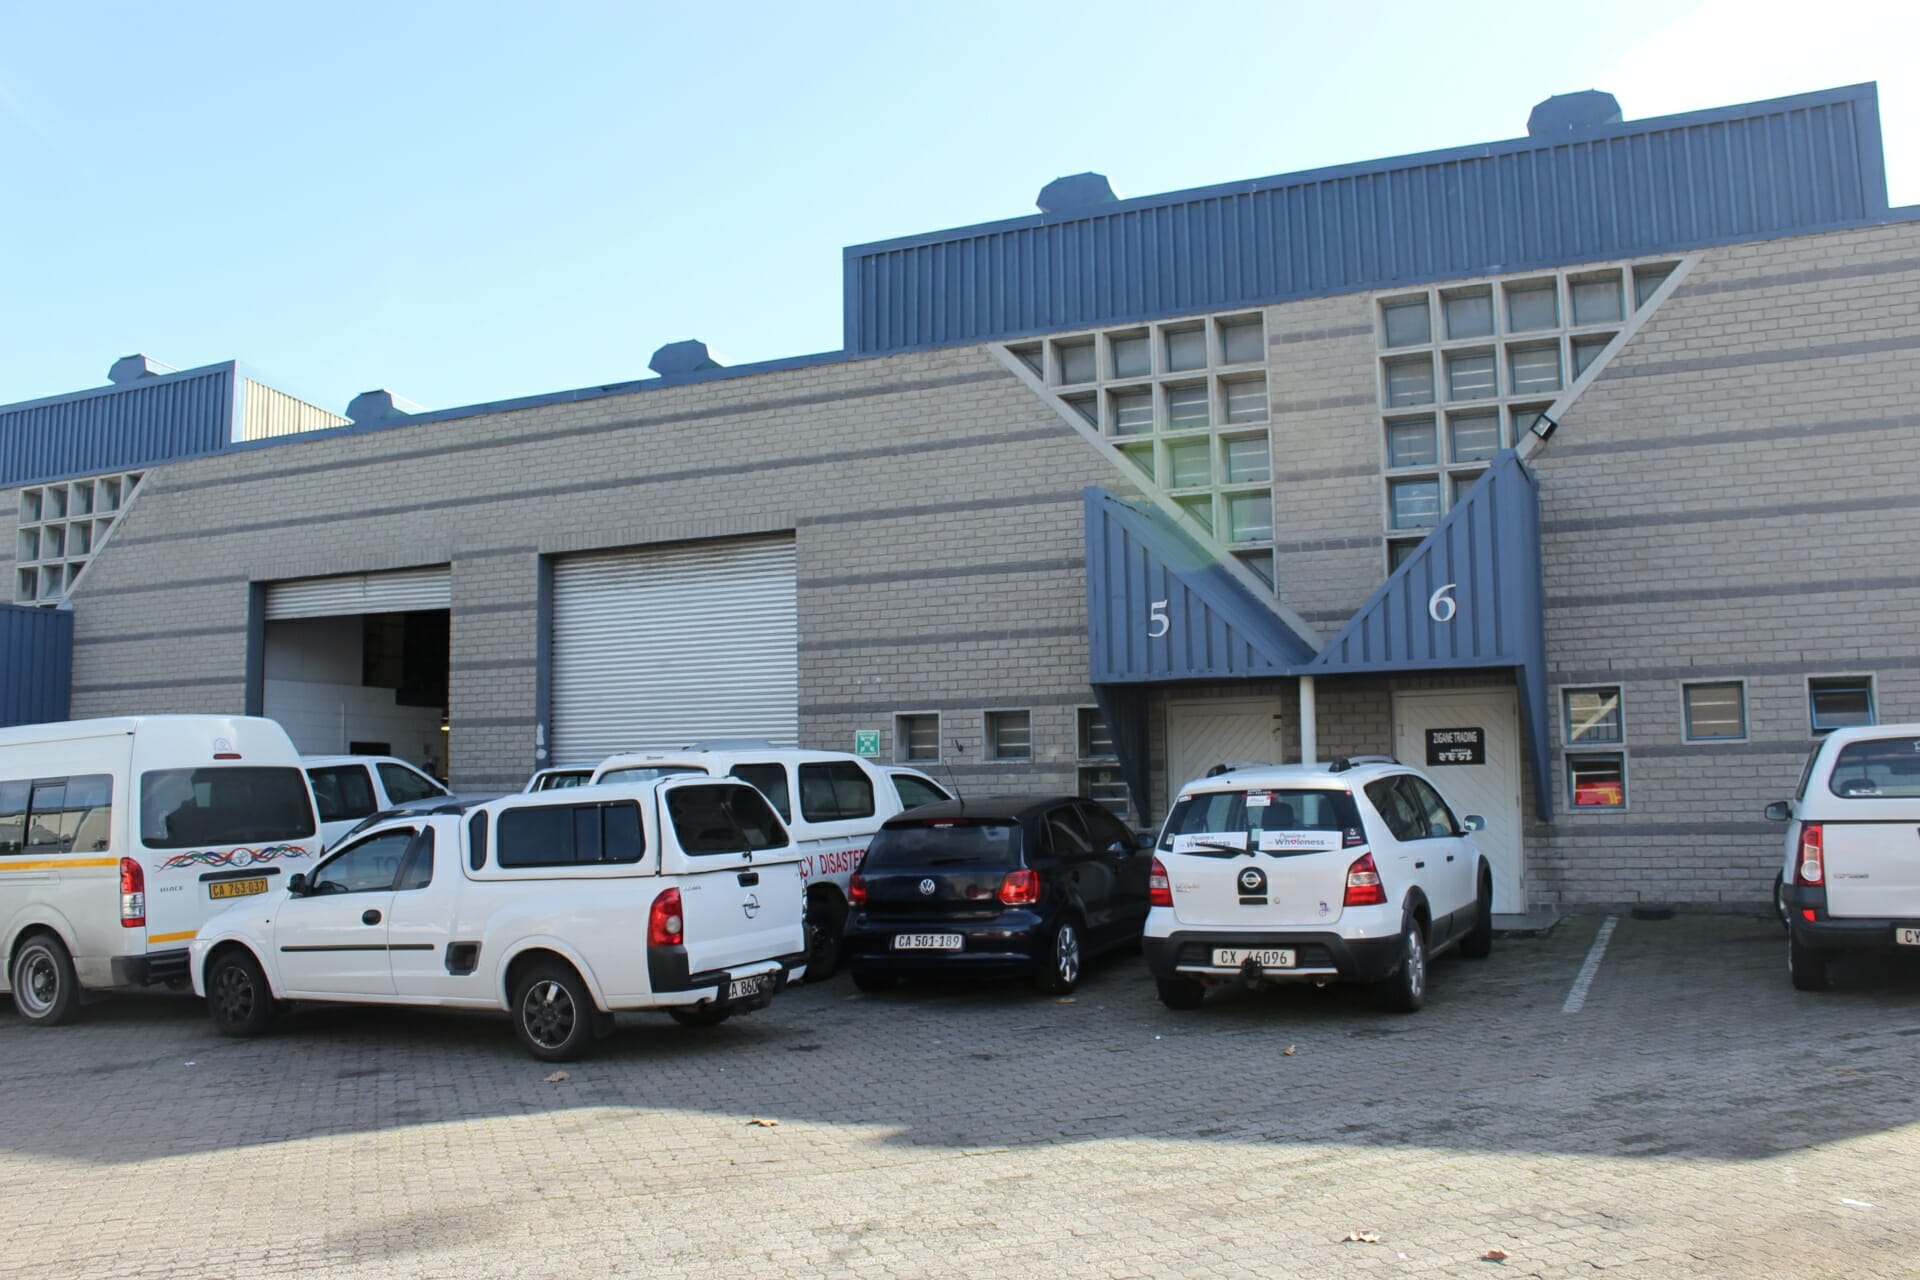 241m² – Park 14 light industrial unit available to let in 14th Avenue Maitland